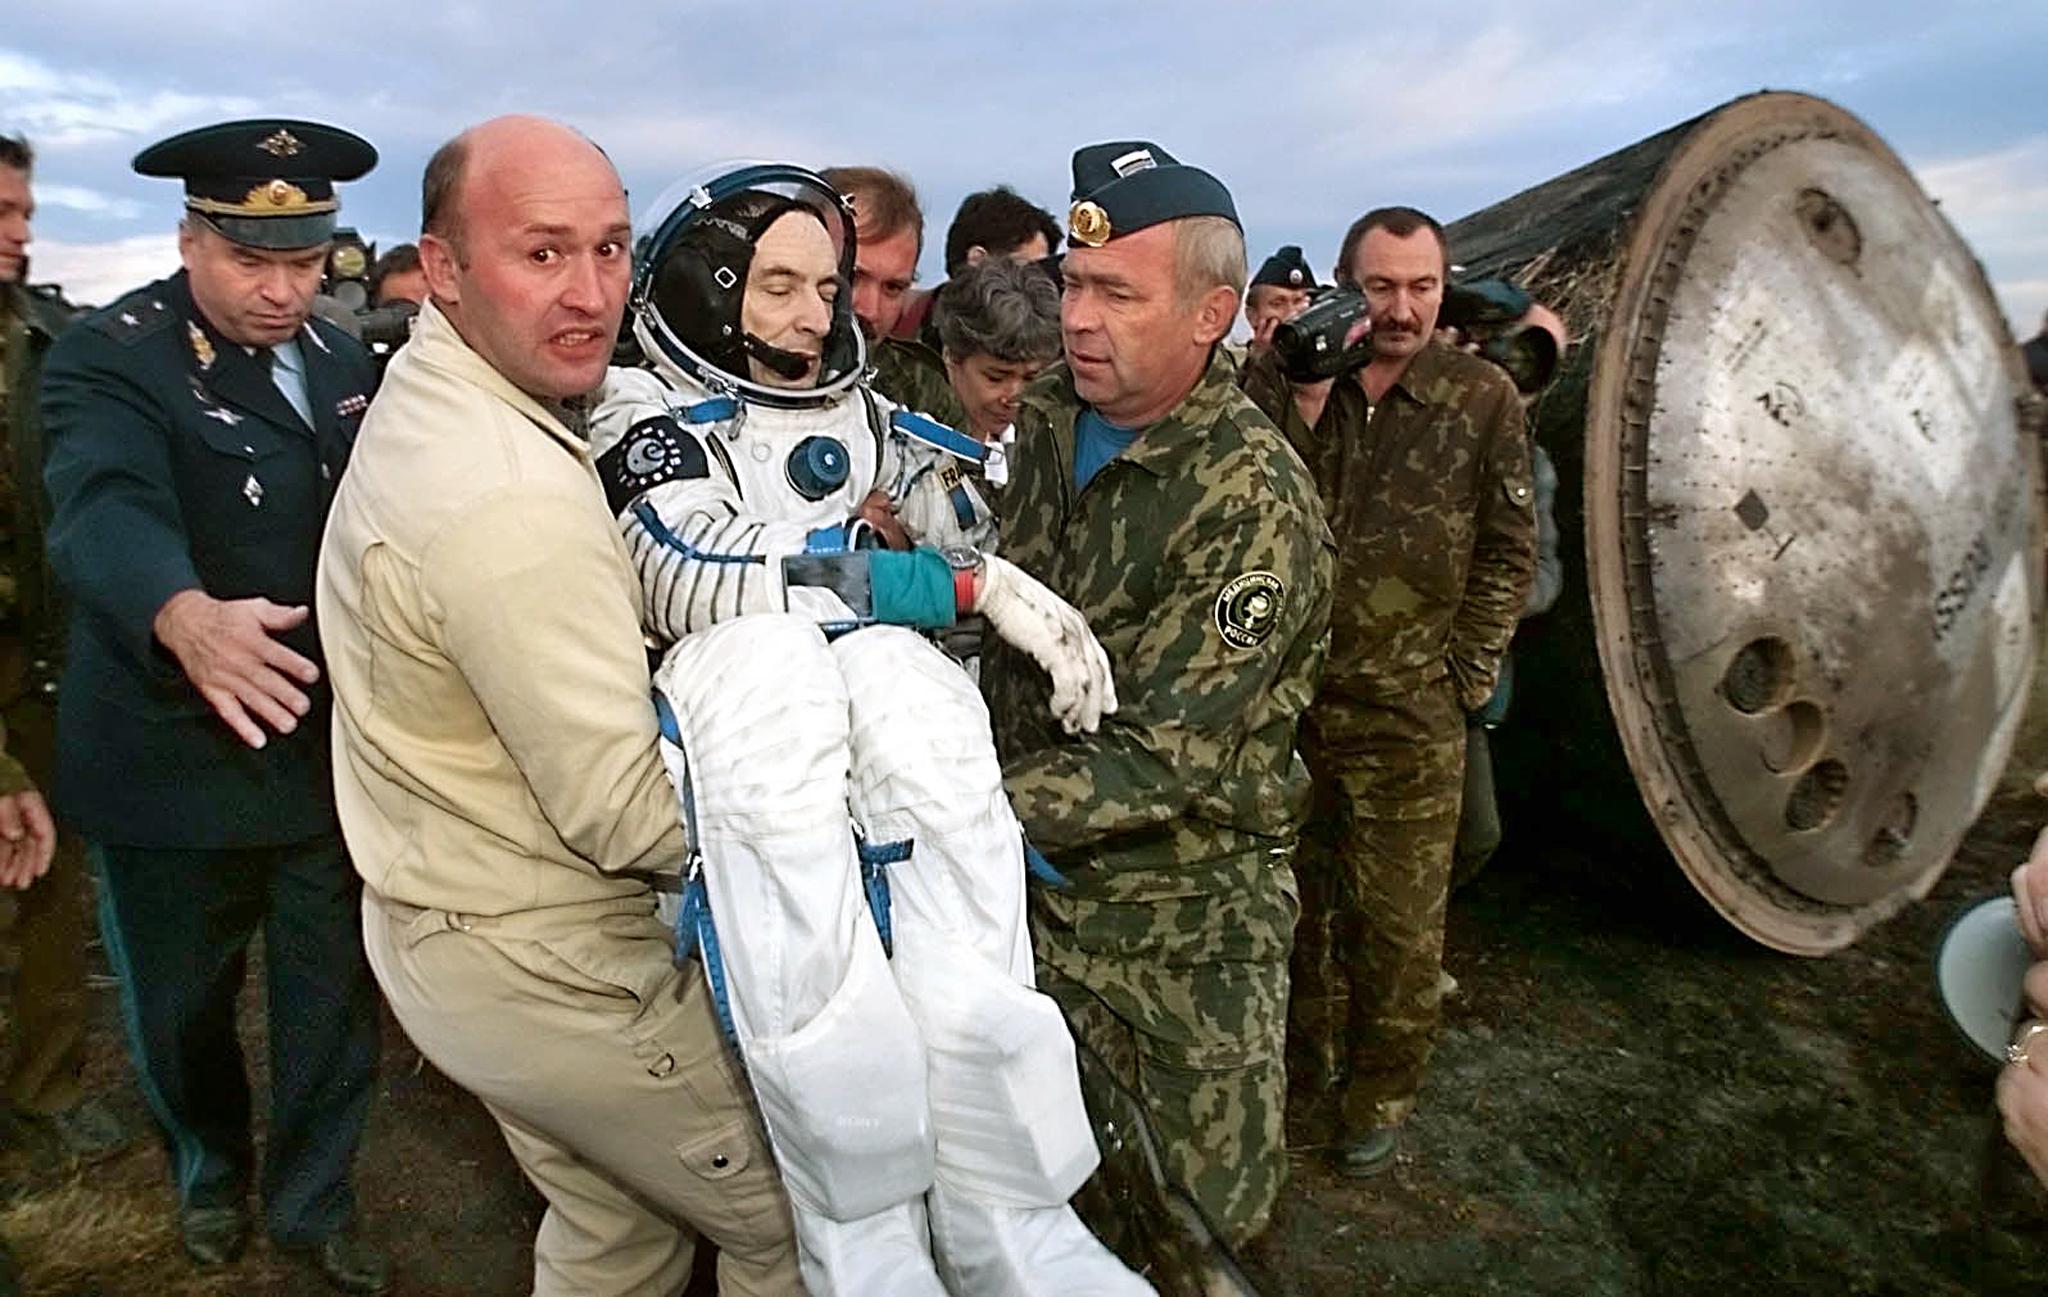 French astronaut Jean-Pierre Haignere, part of the last crew on Mir, is carried out of the  Souyz TM- 29  space craft after landing in Kazakhstan on Aug. 28, 1999.